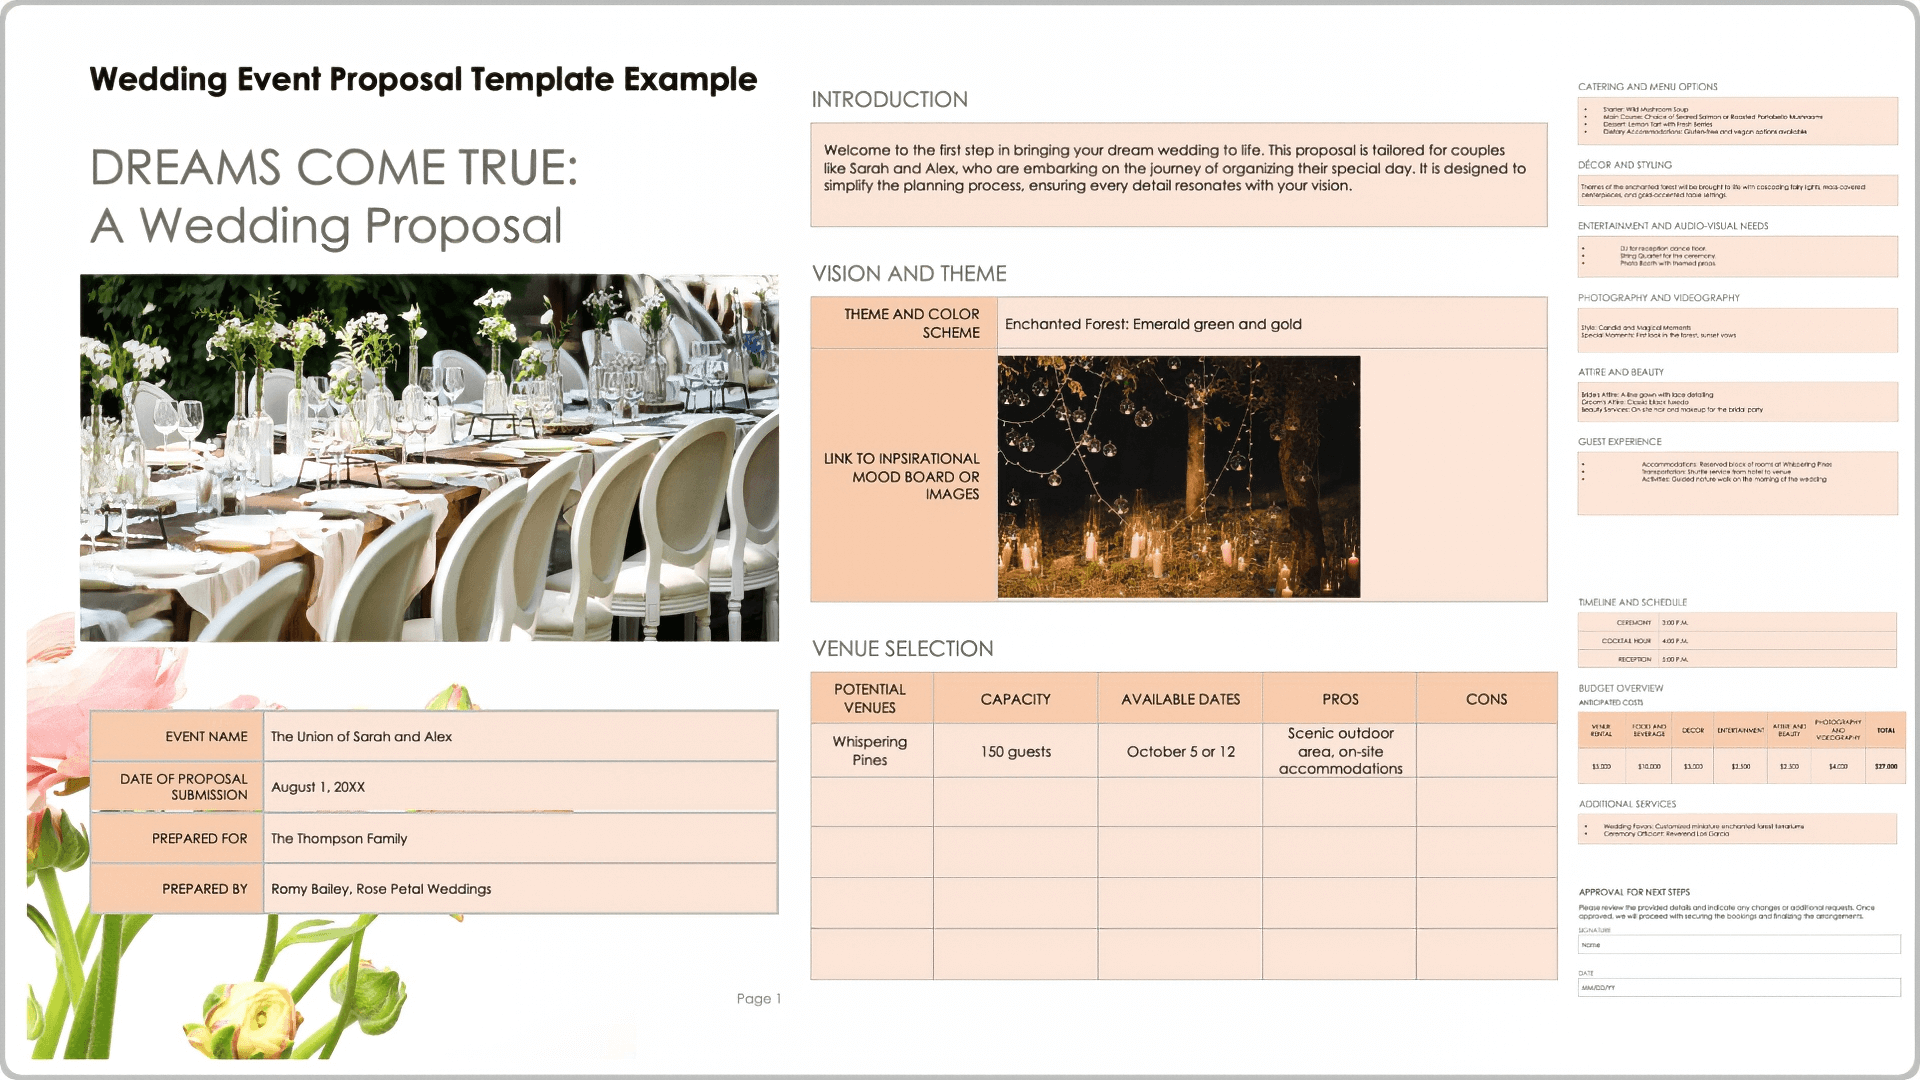 Wedding Event Proposal Template Example